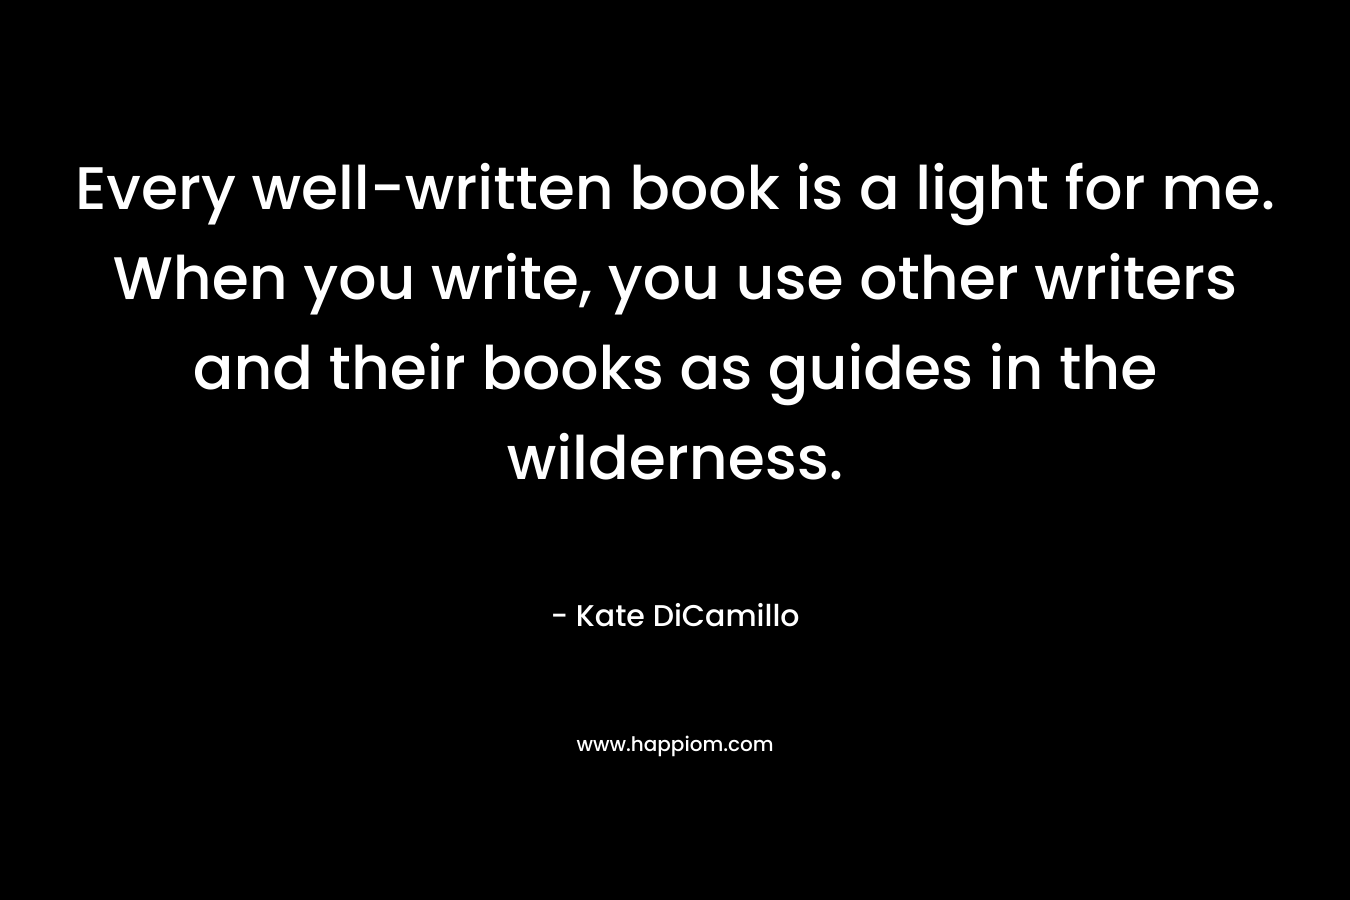 Every well-written book is a light for me. When you write, you use other writers and their books as guides in the wilderness. 